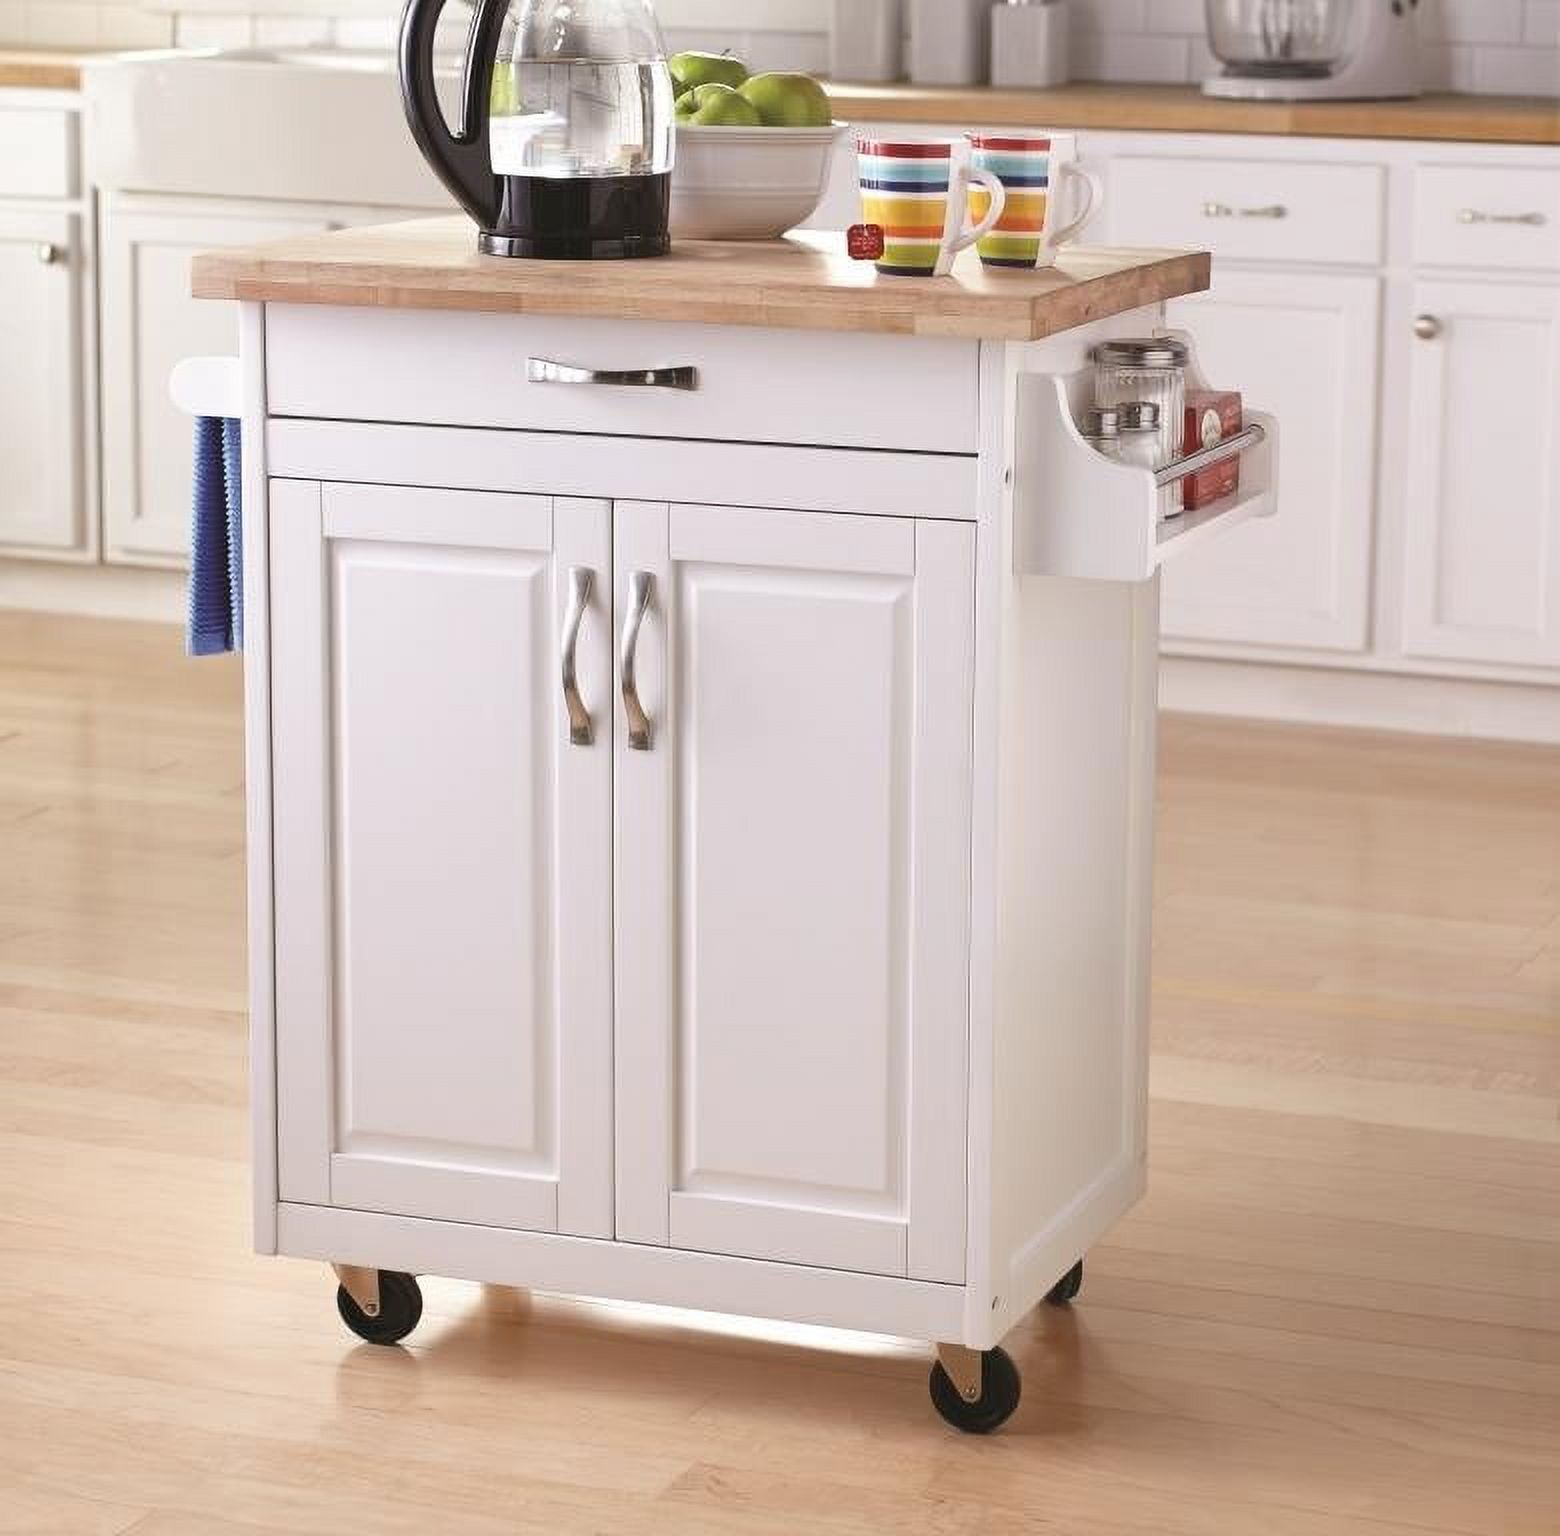 Mainstays Kitchen Island Cart with Drawer and Storage Shelves, White - image 1 of 18